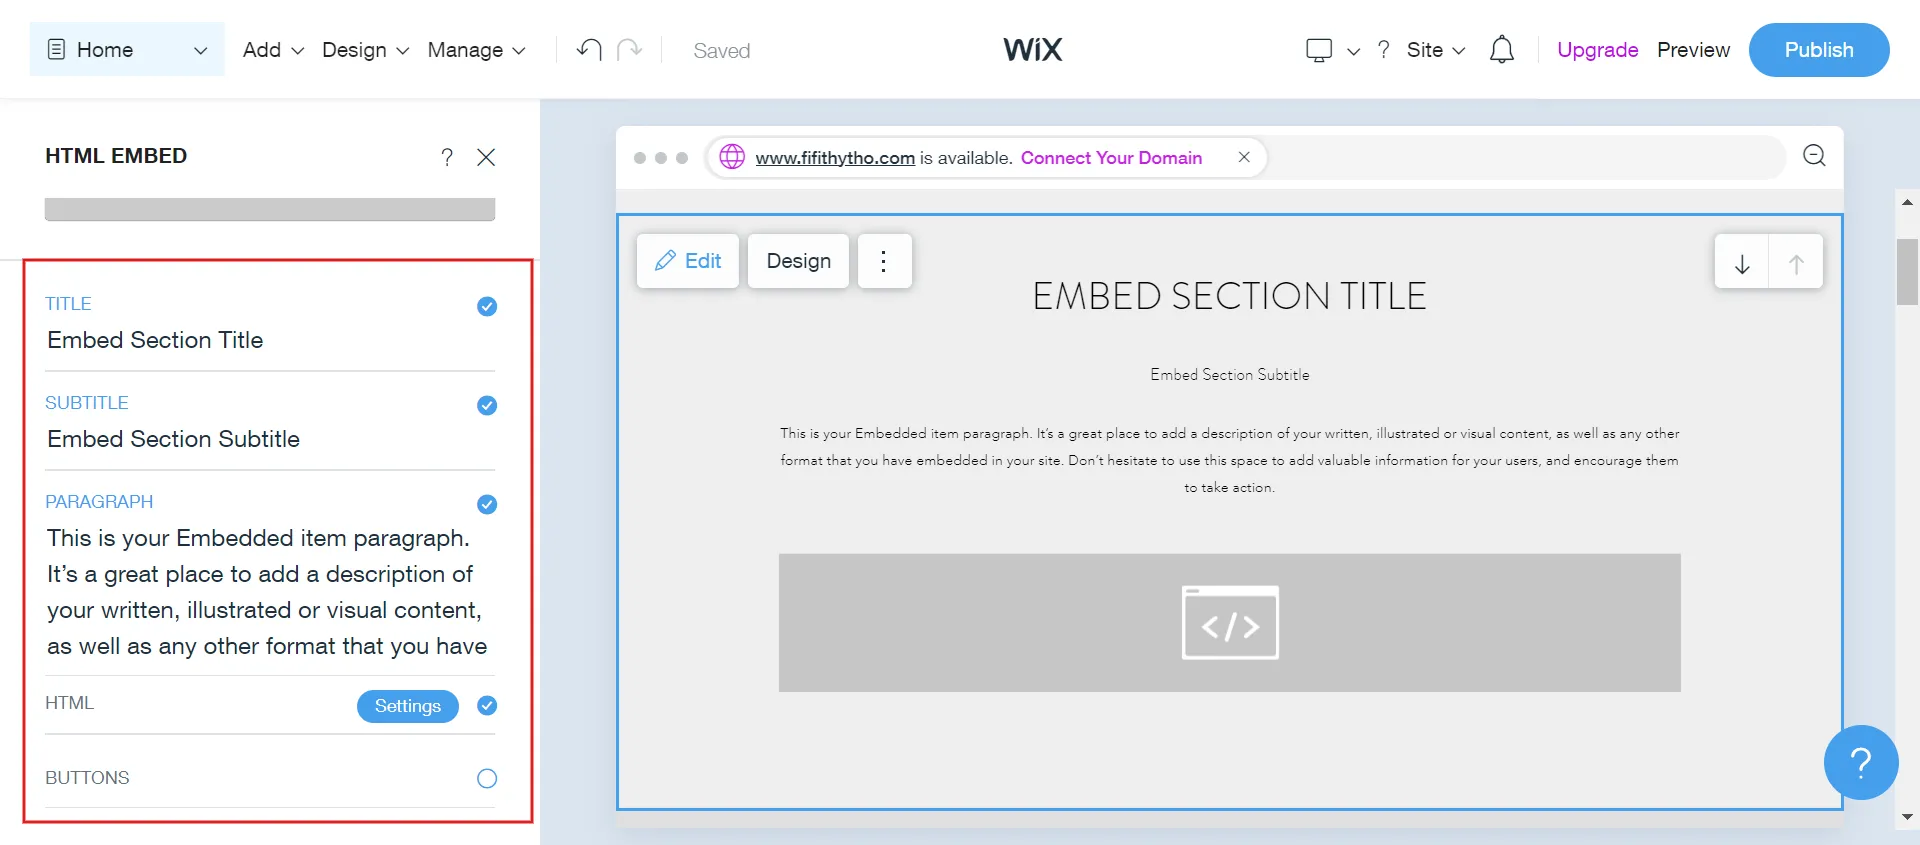 Customize HTML embed section